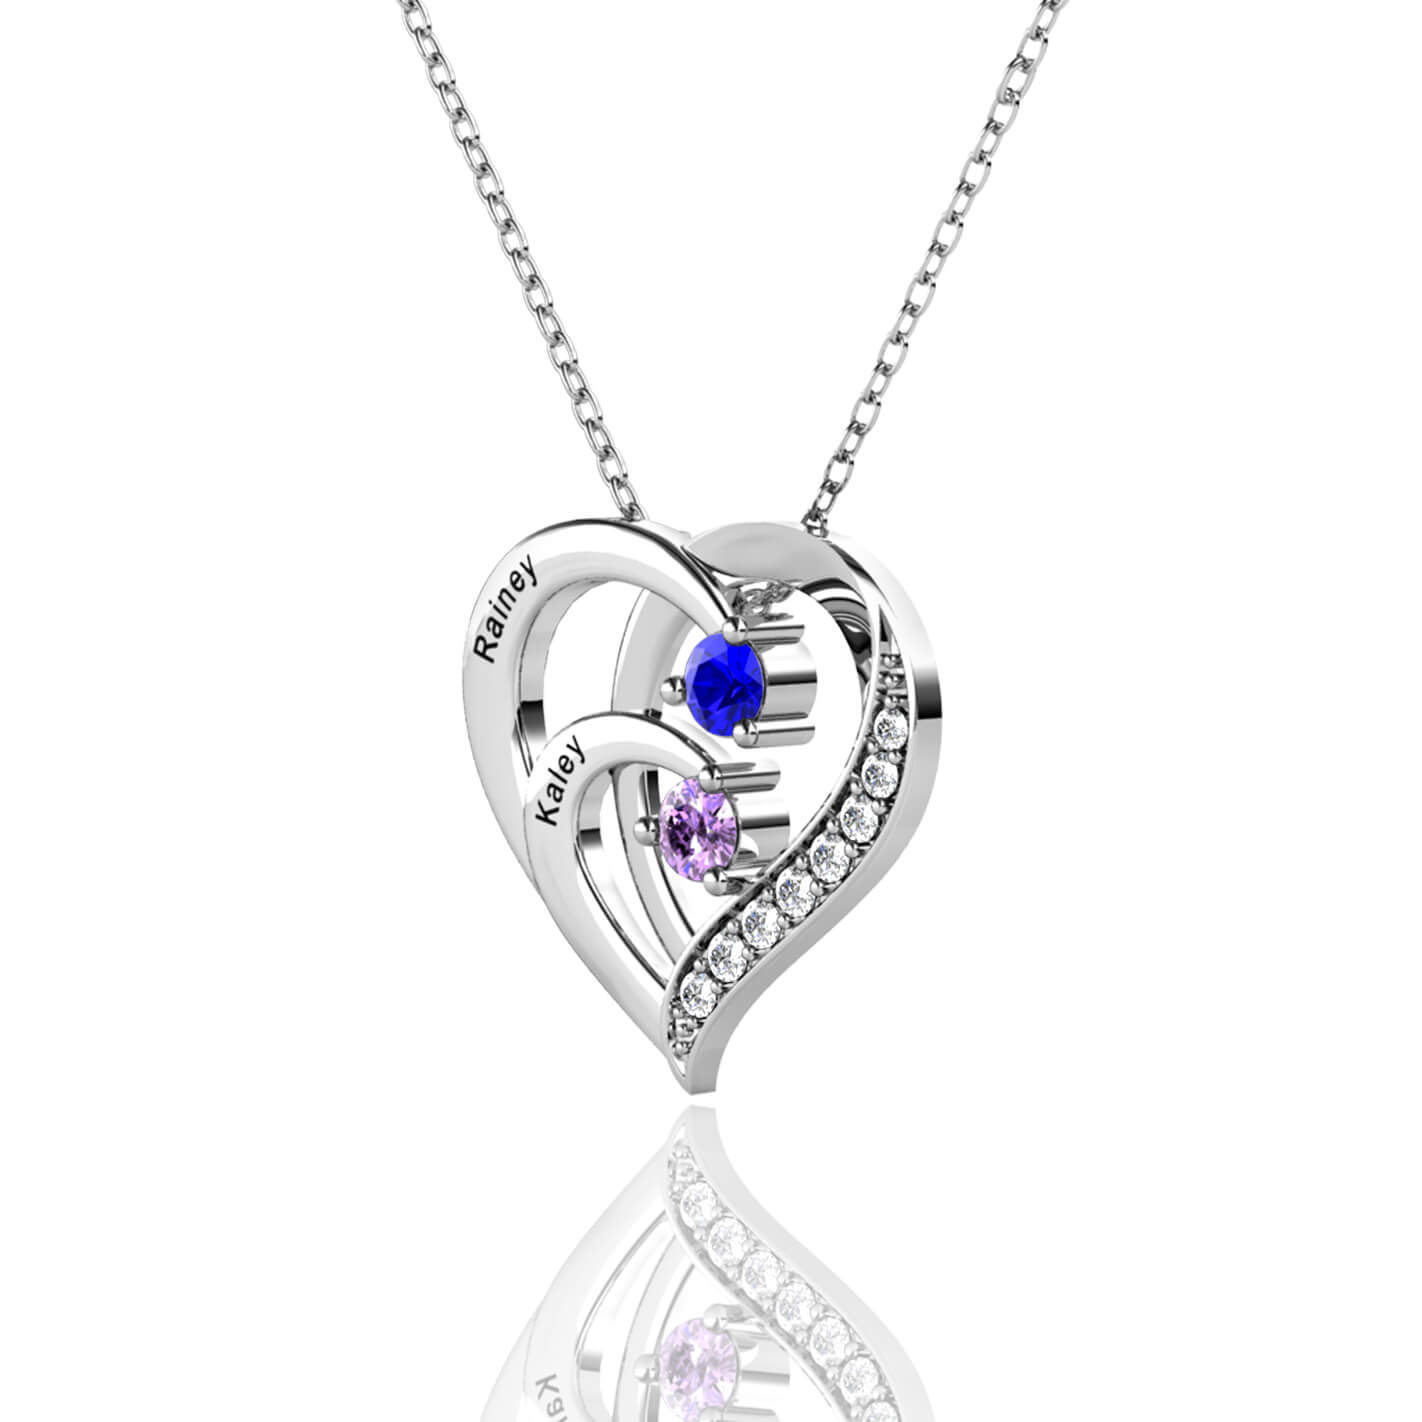 Personalised 2 Birthstones Necklace with 2 Engraved Names